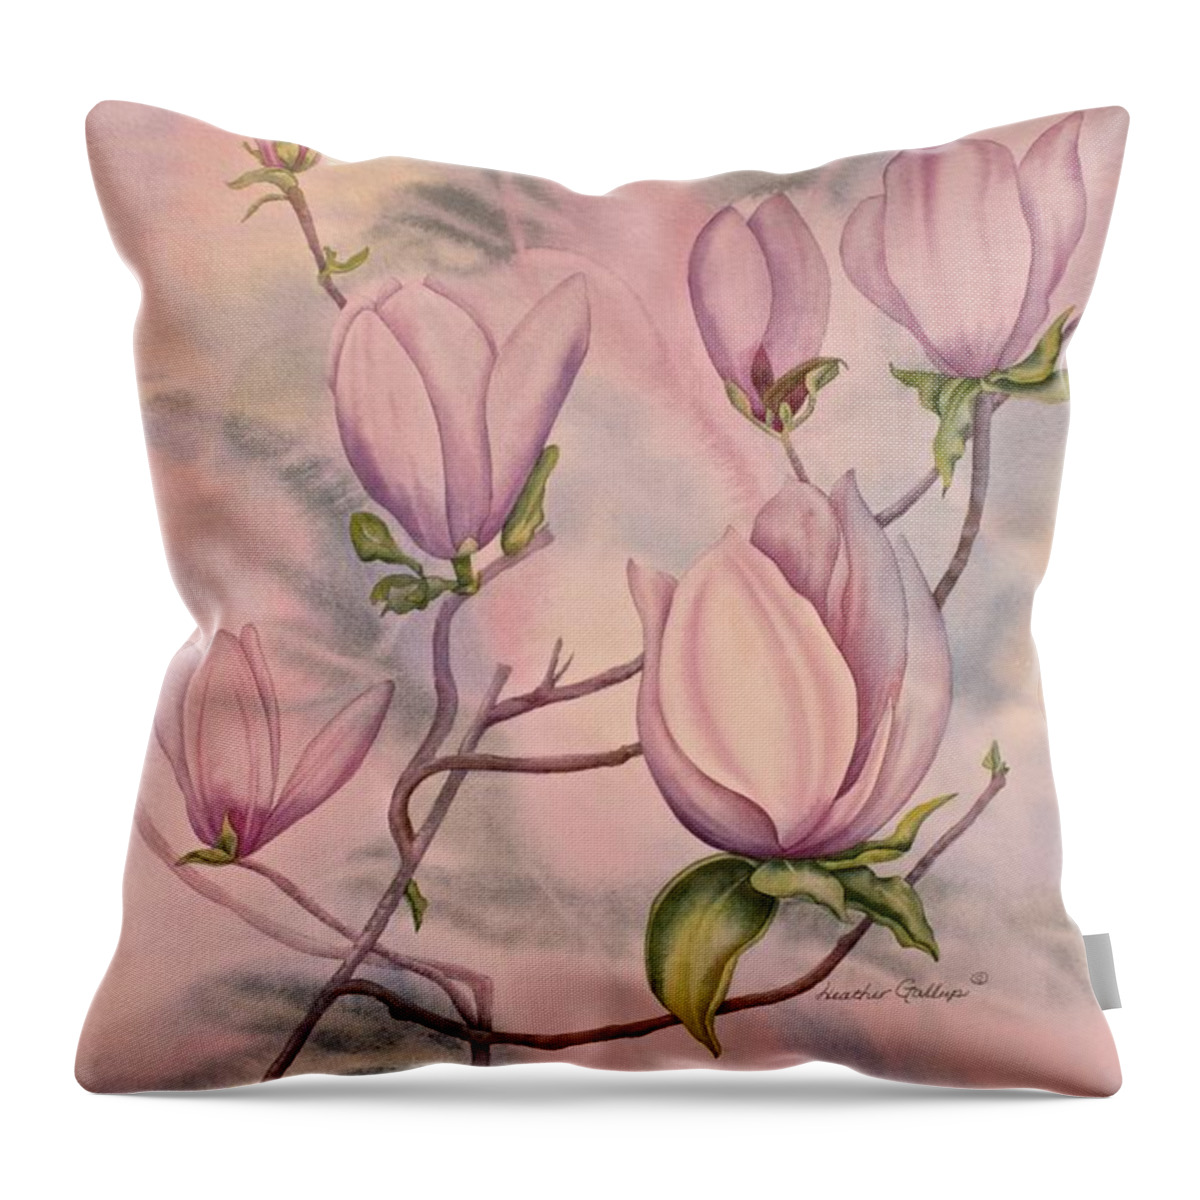 Southern Belle Throw Pillow featuring the painting Southern Belle by Heather Gallup